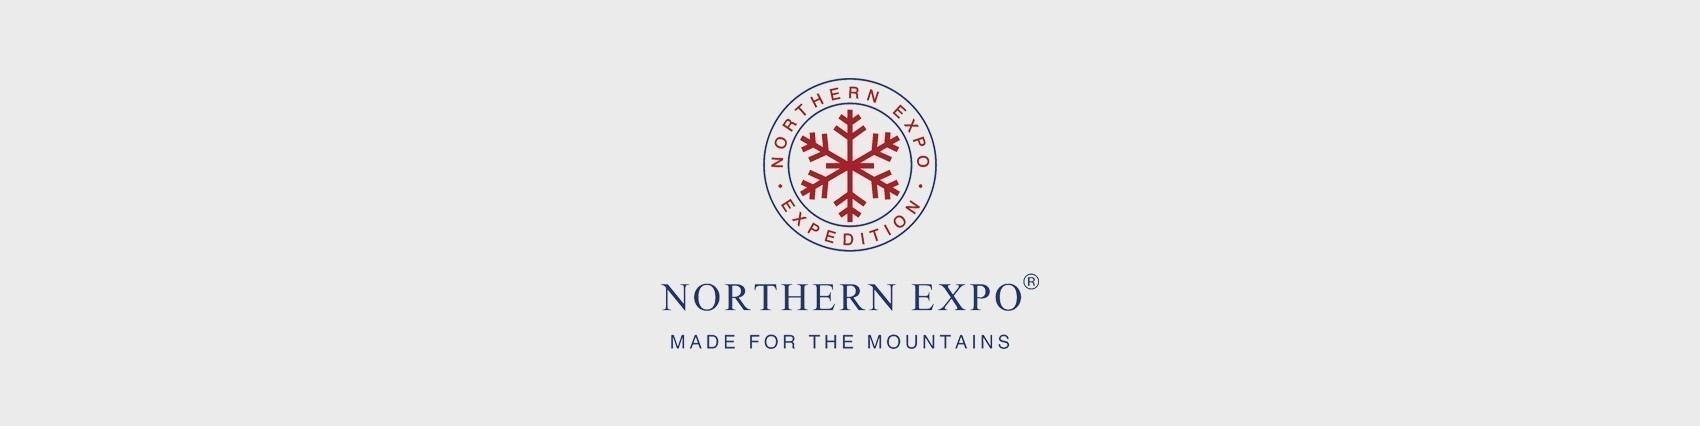 Nothern expo